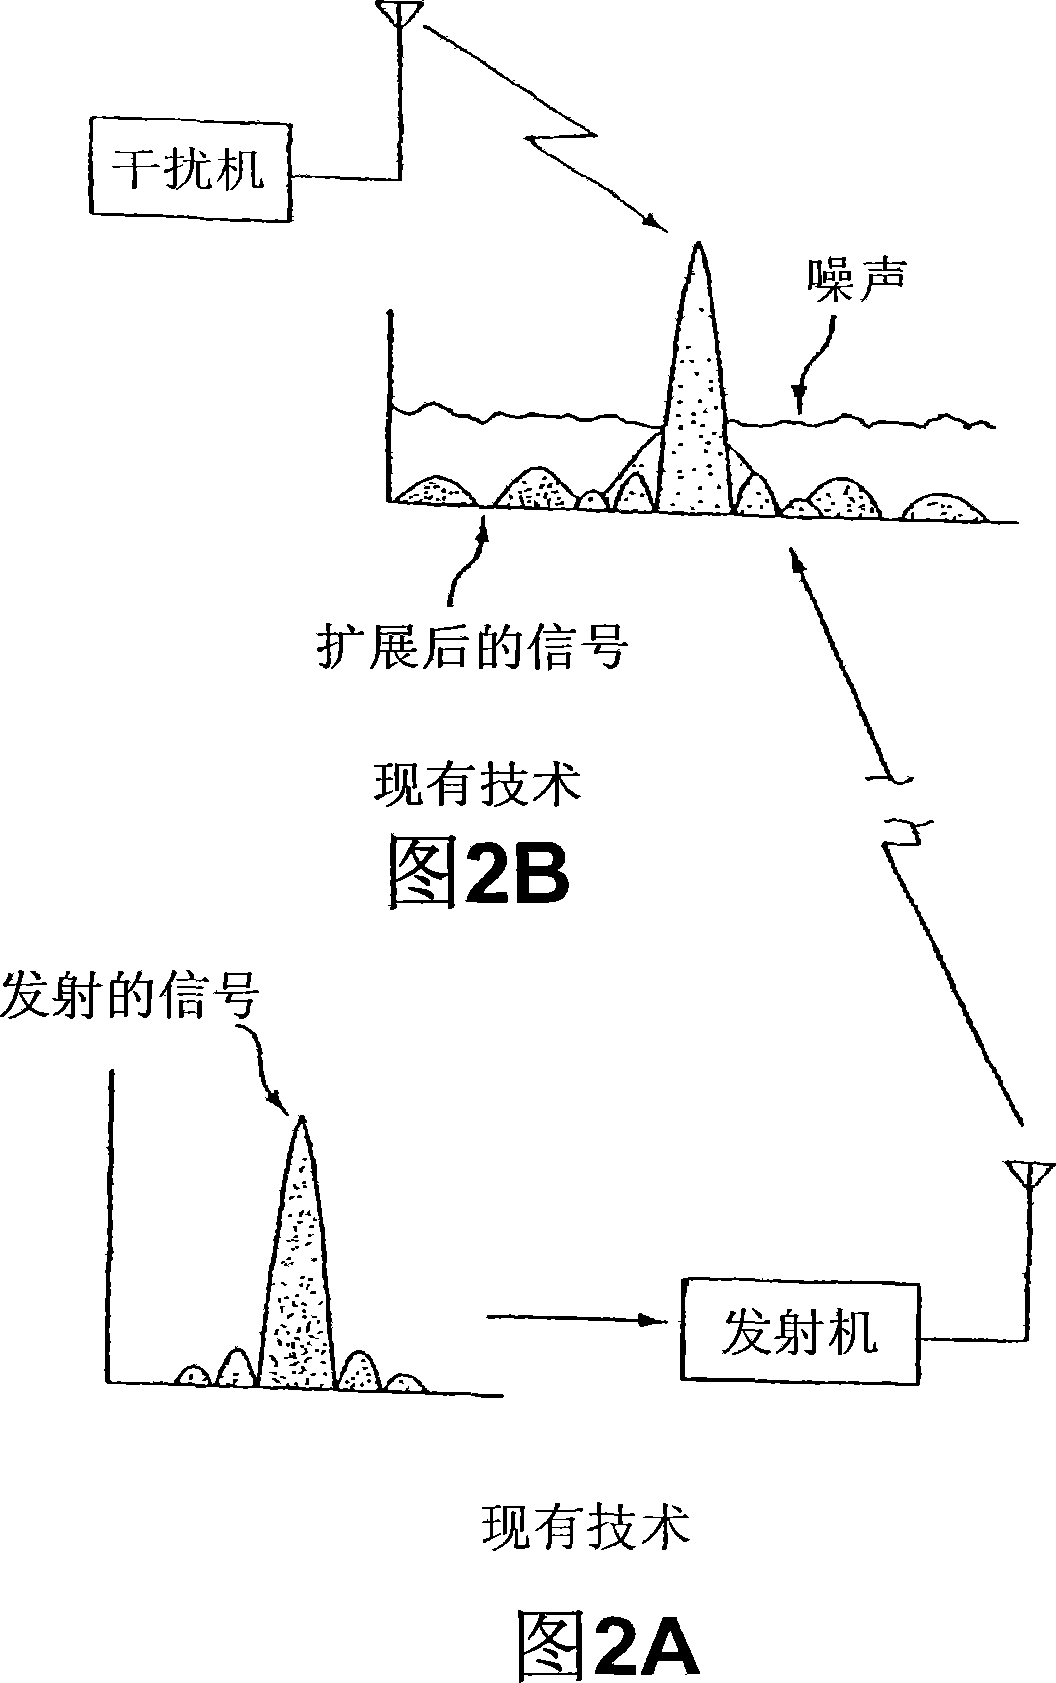 Parallel spread spectrum communication system and method